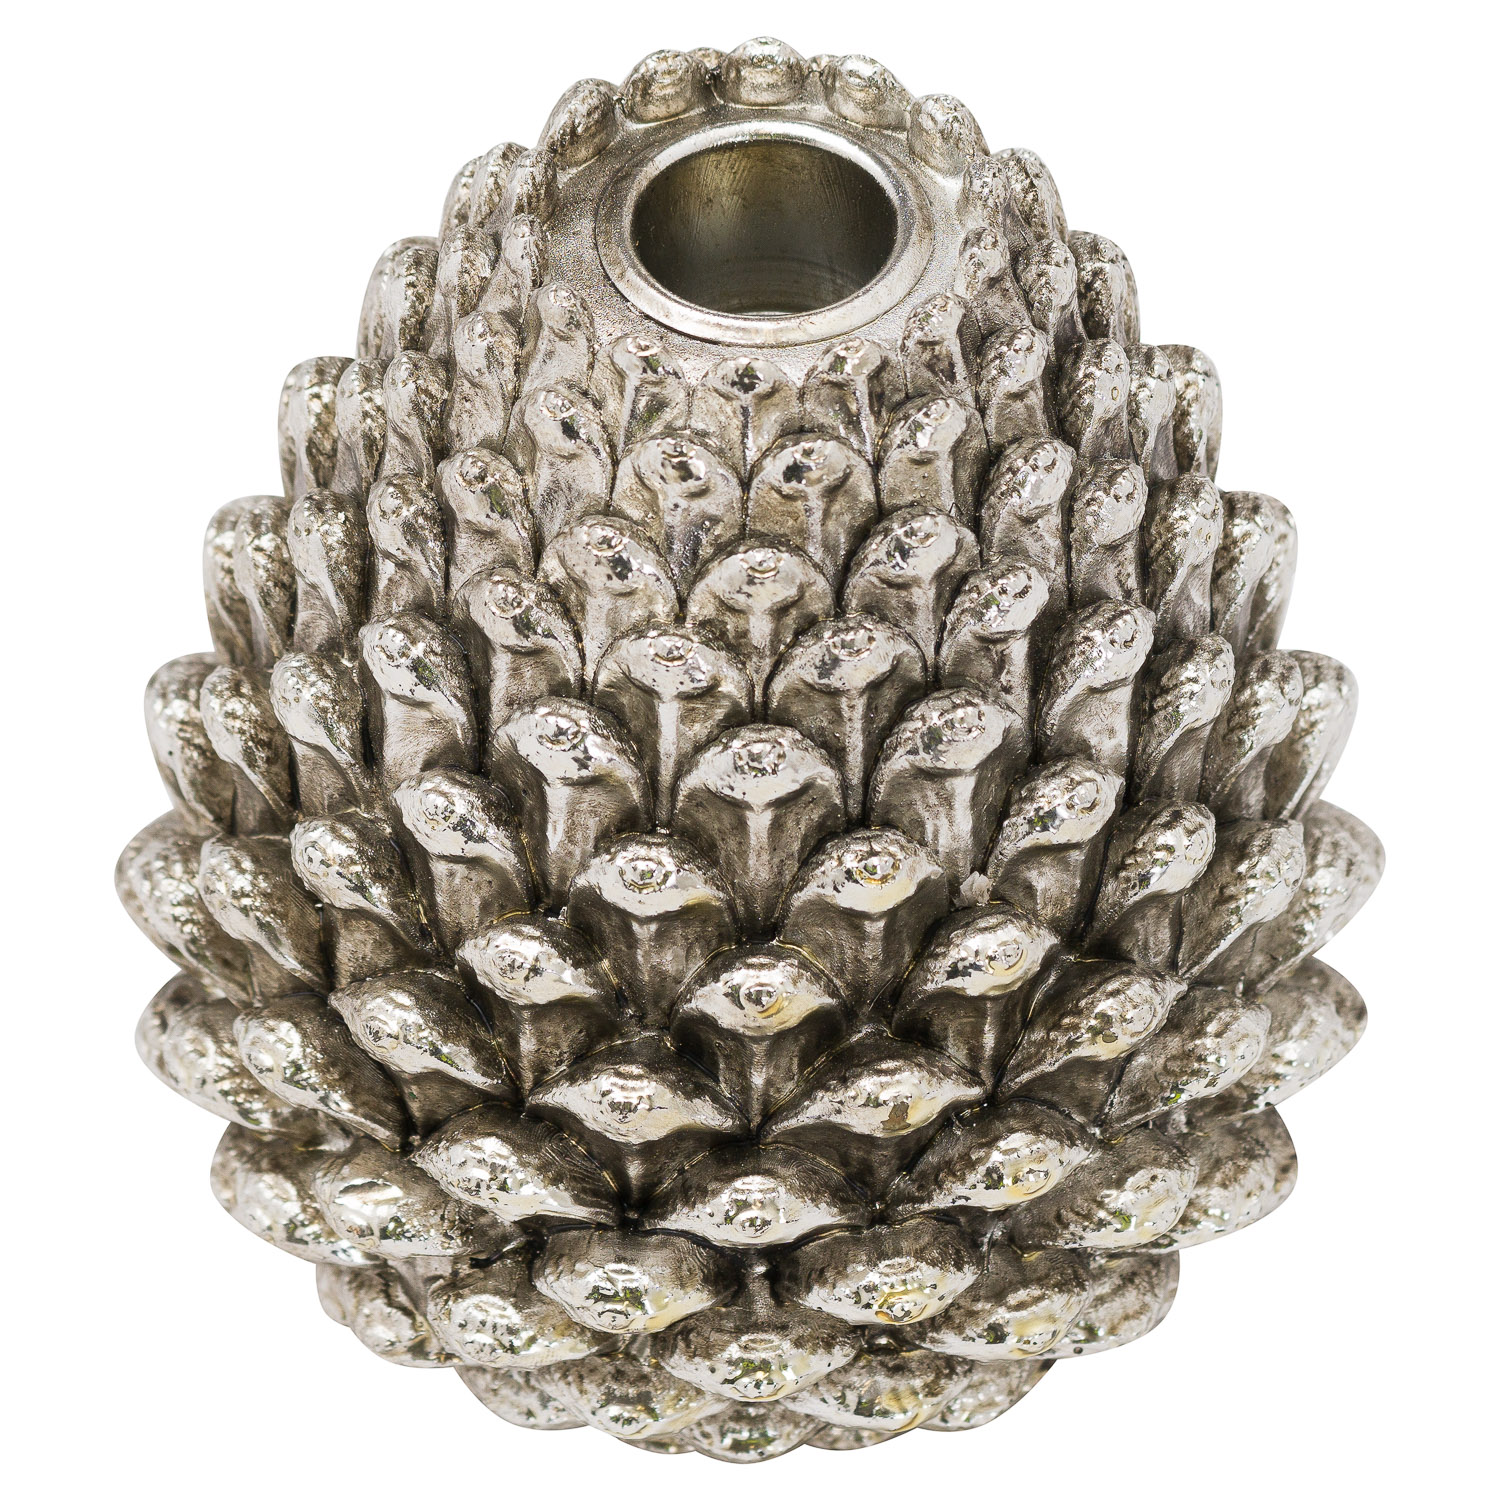 Large Silver Pinecone Candle Holder - Image 1